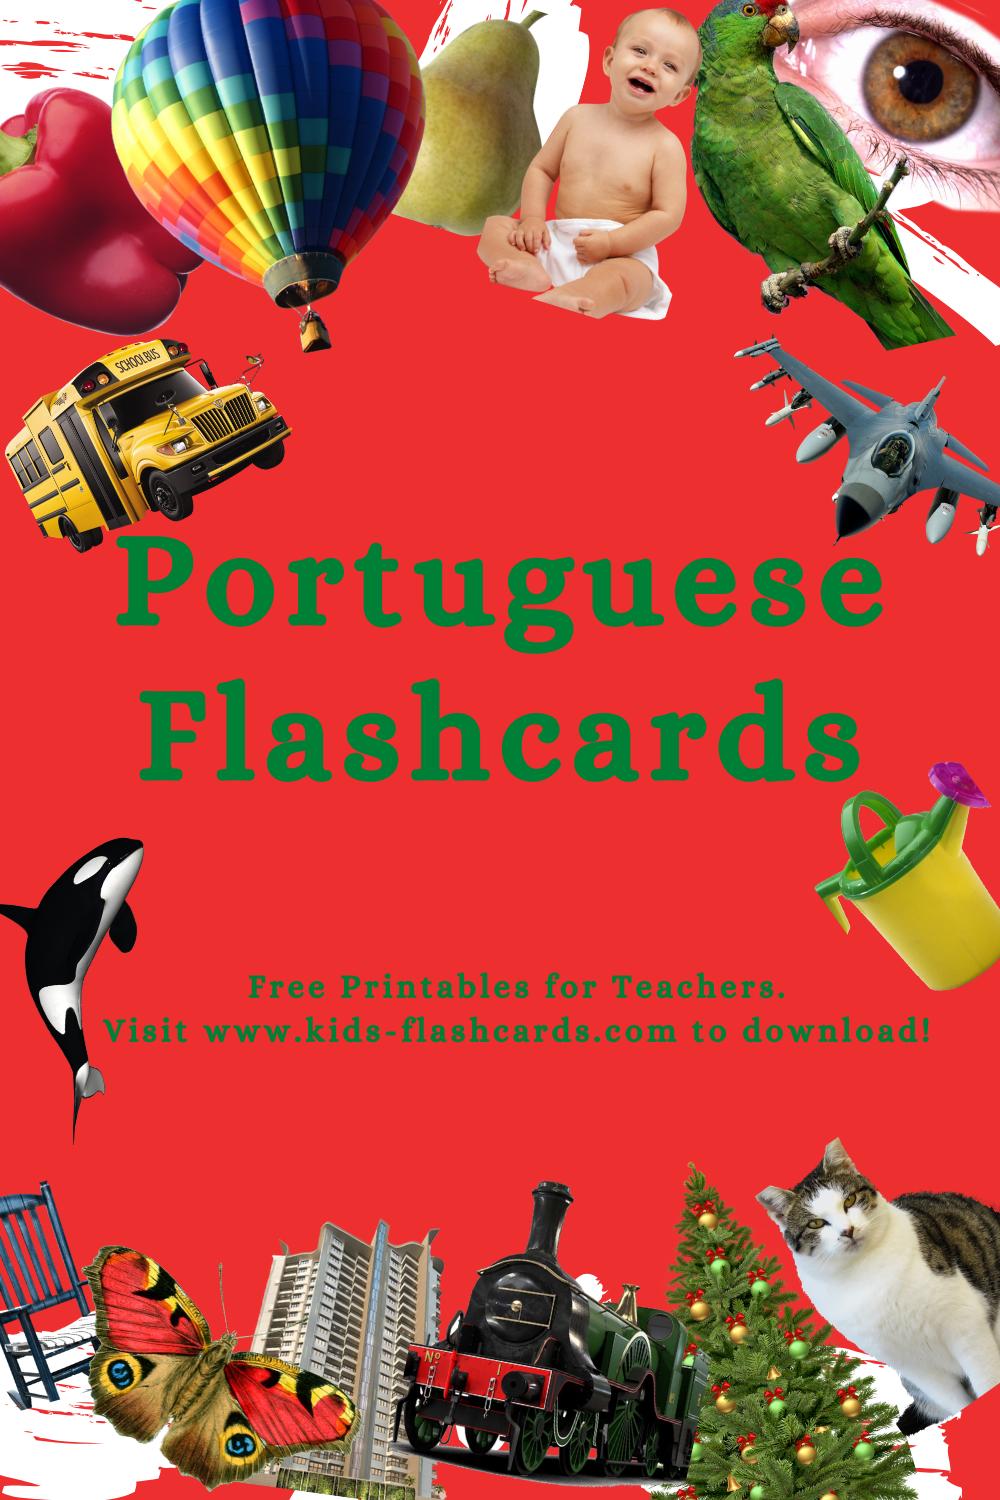 Worksheets to learn Portuguese language